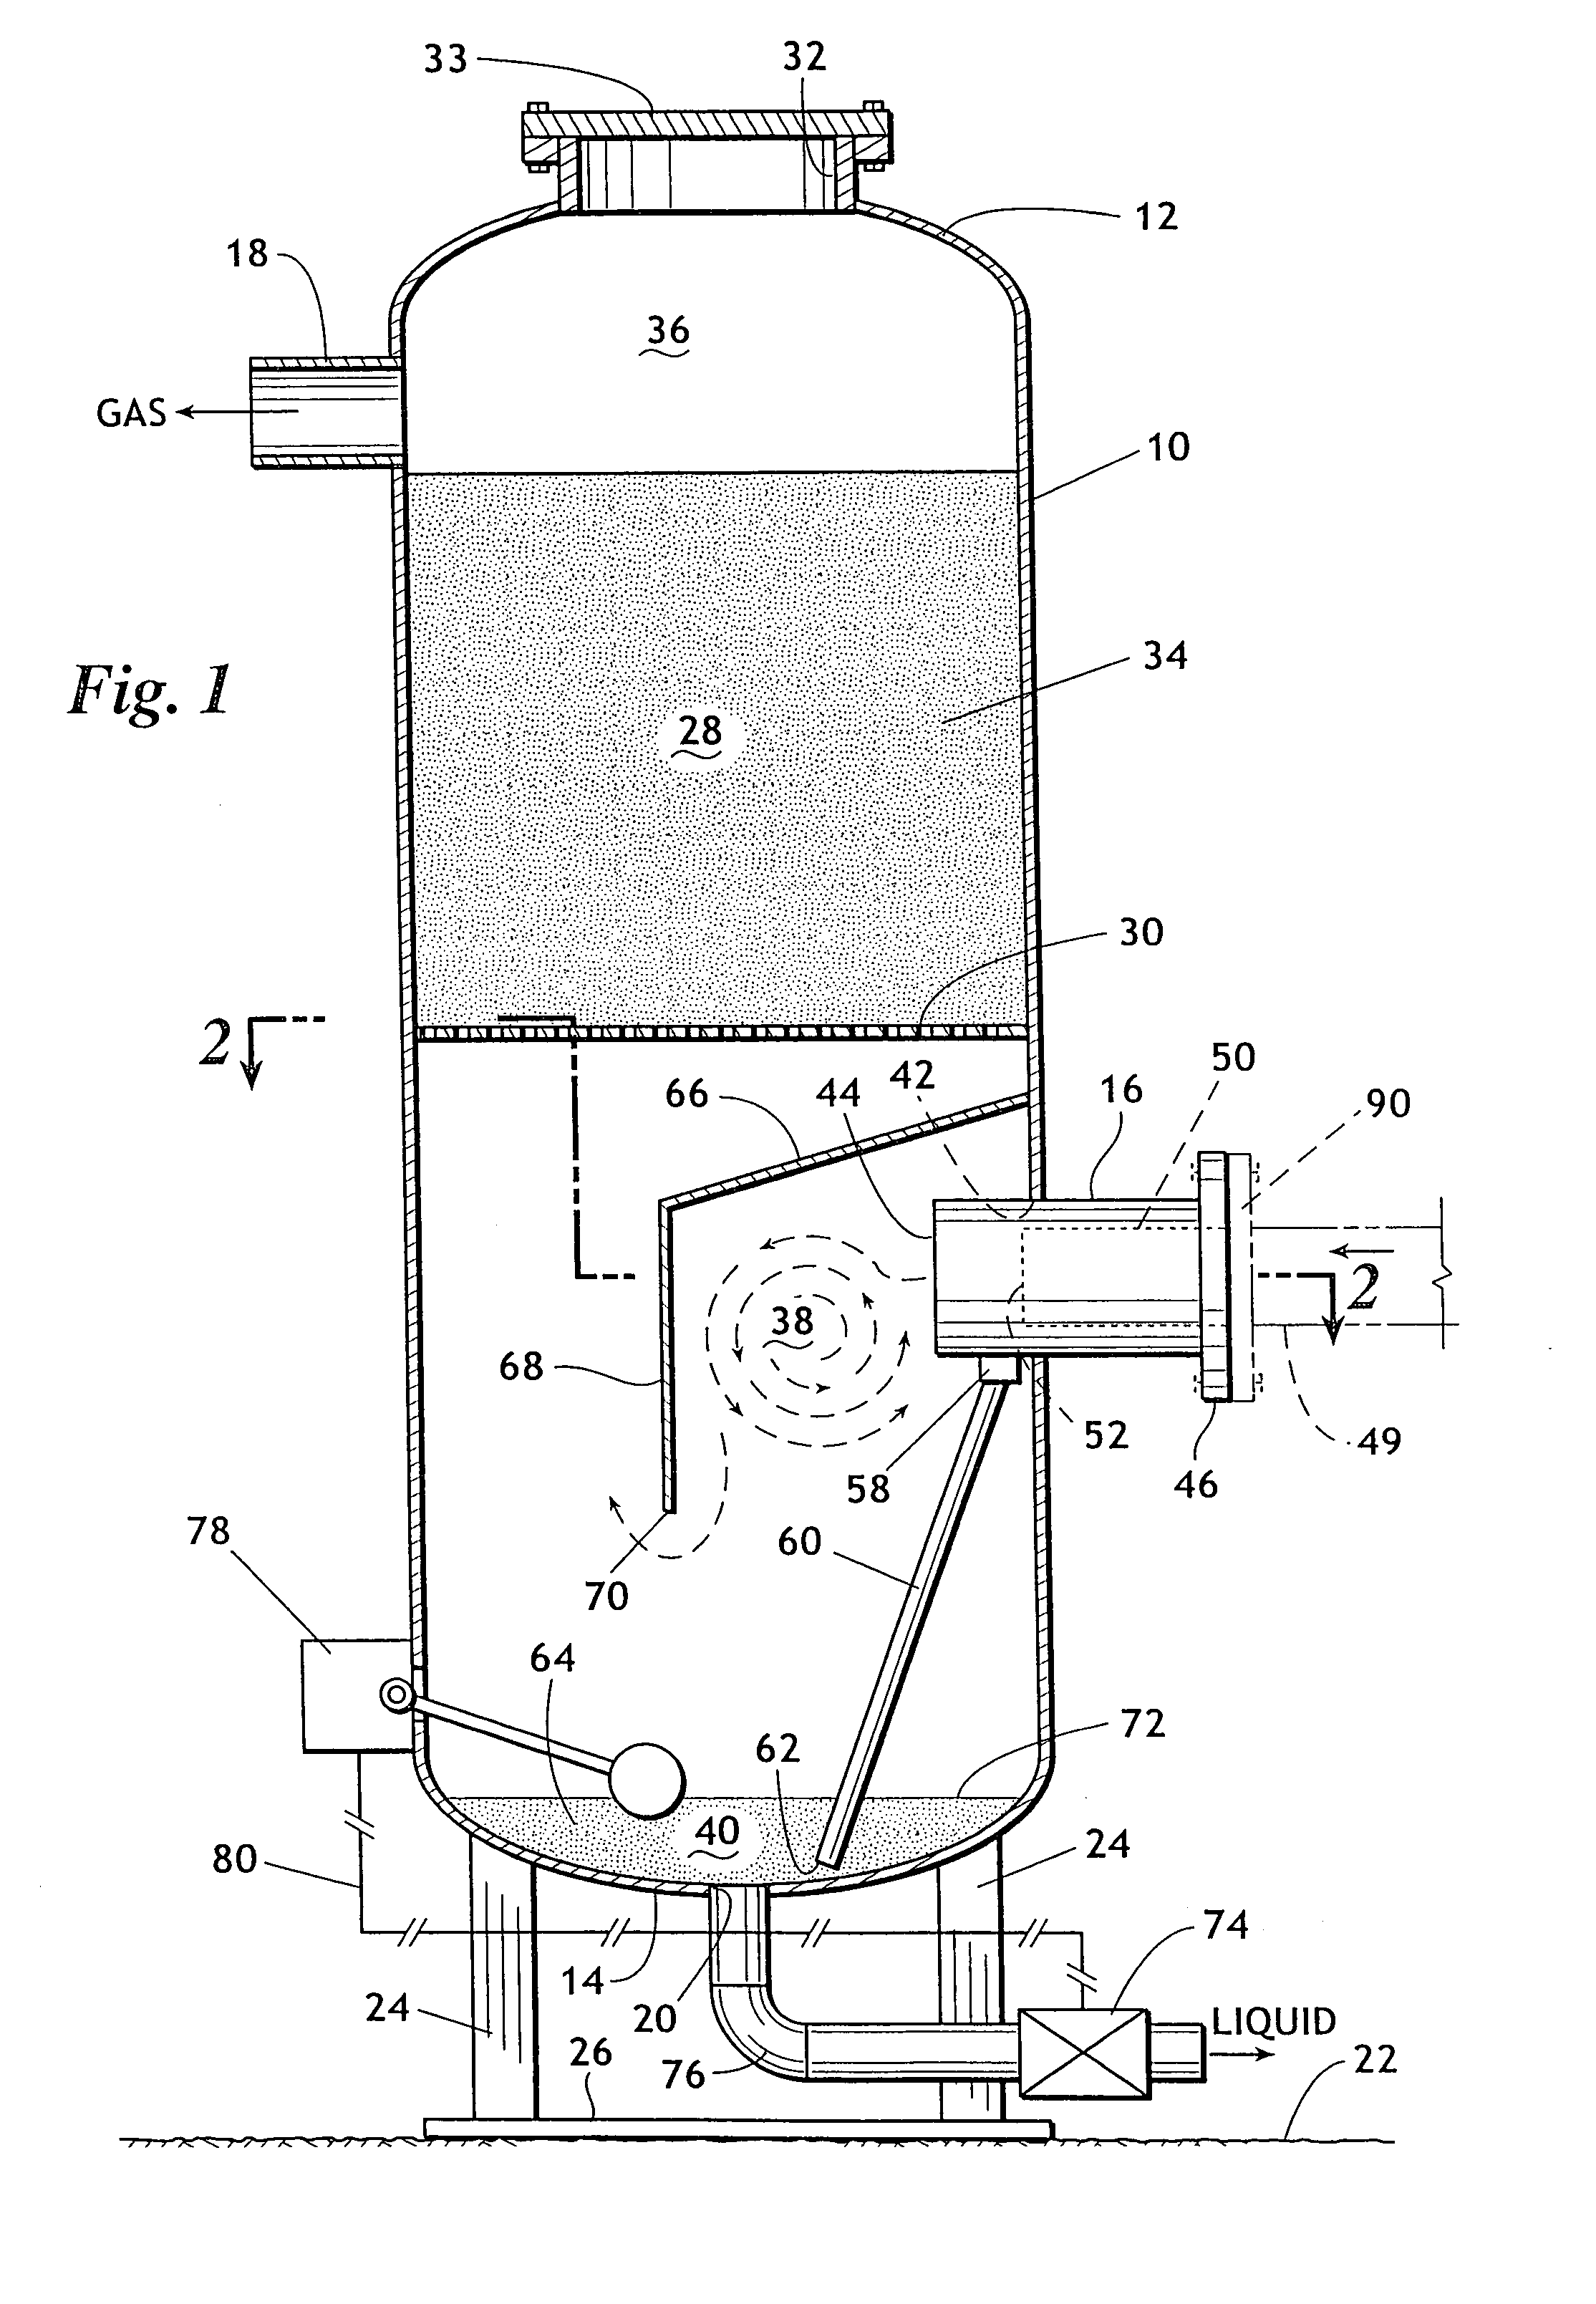 Dehydration of wet gas utilizing intimate contact with a recirculating deliquescent brine